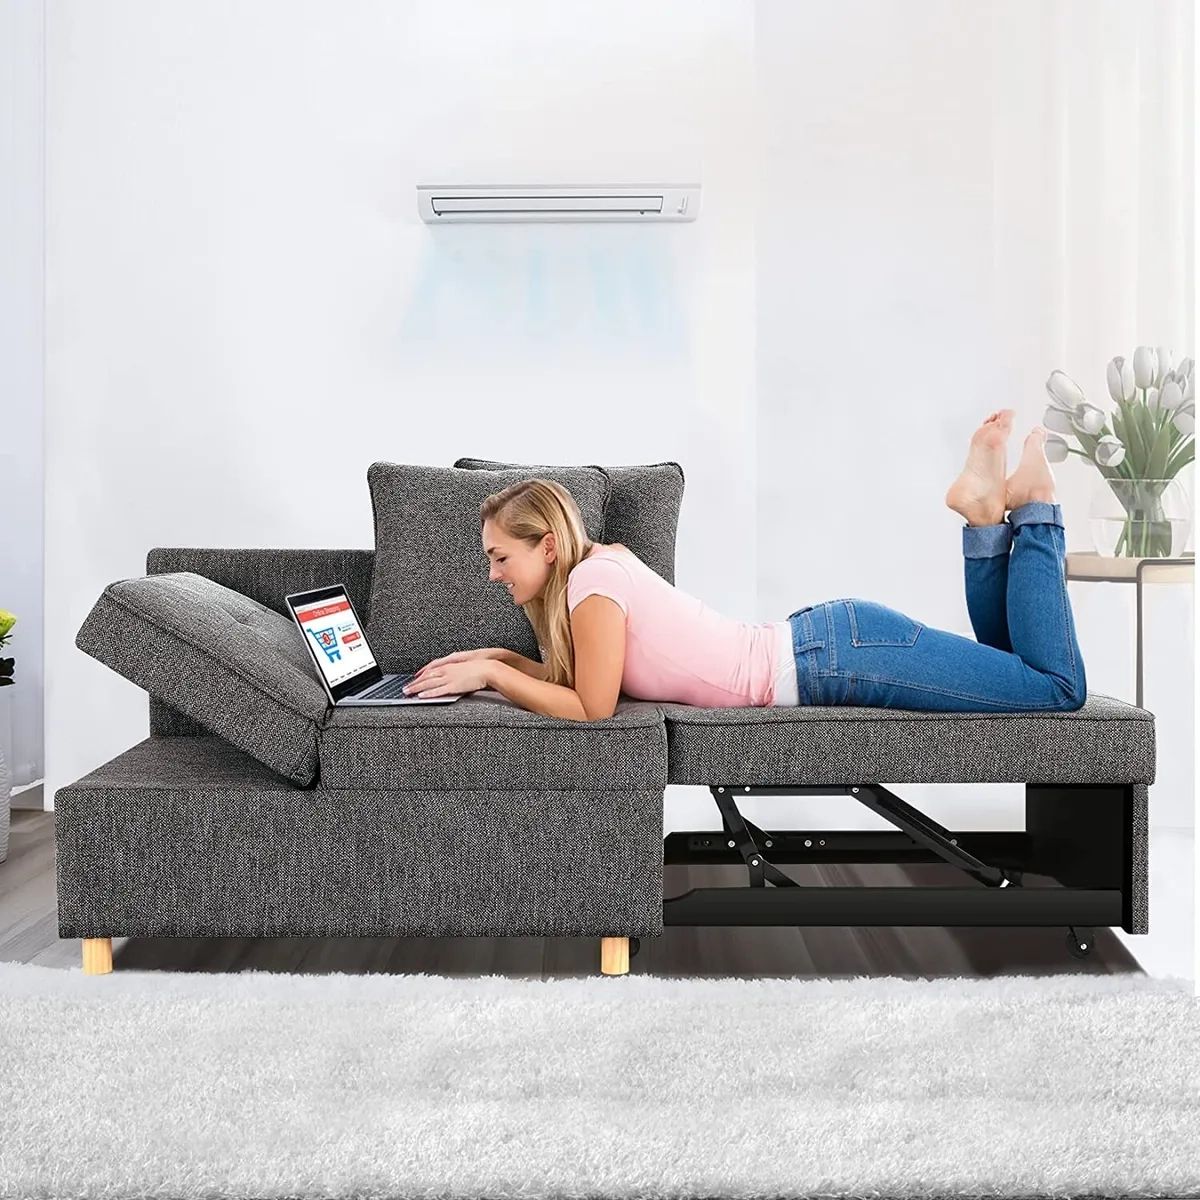 ⭐folding Ottoman Sofa Bed Convertible Chair 4 In 1 Multi Function Sleeper  Sofa~⭐ | Ebay For 4 In 1 Convertible Sleeper Chair Beds (Photo 9 of 15)